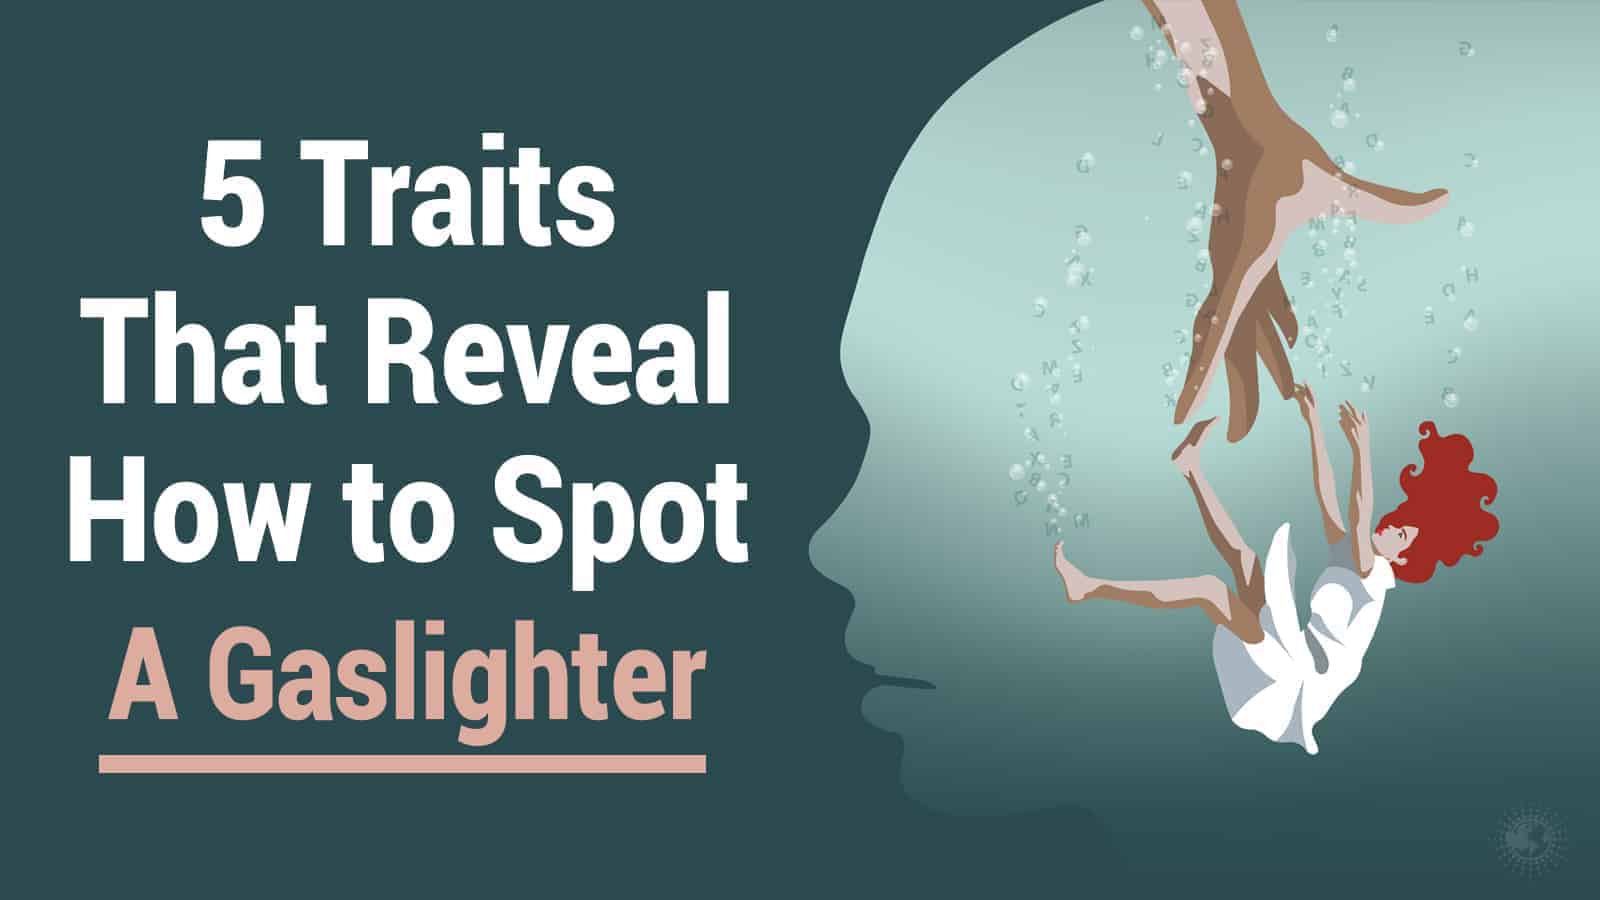 5 Traits That Reveal How to Spot A Gaslighter